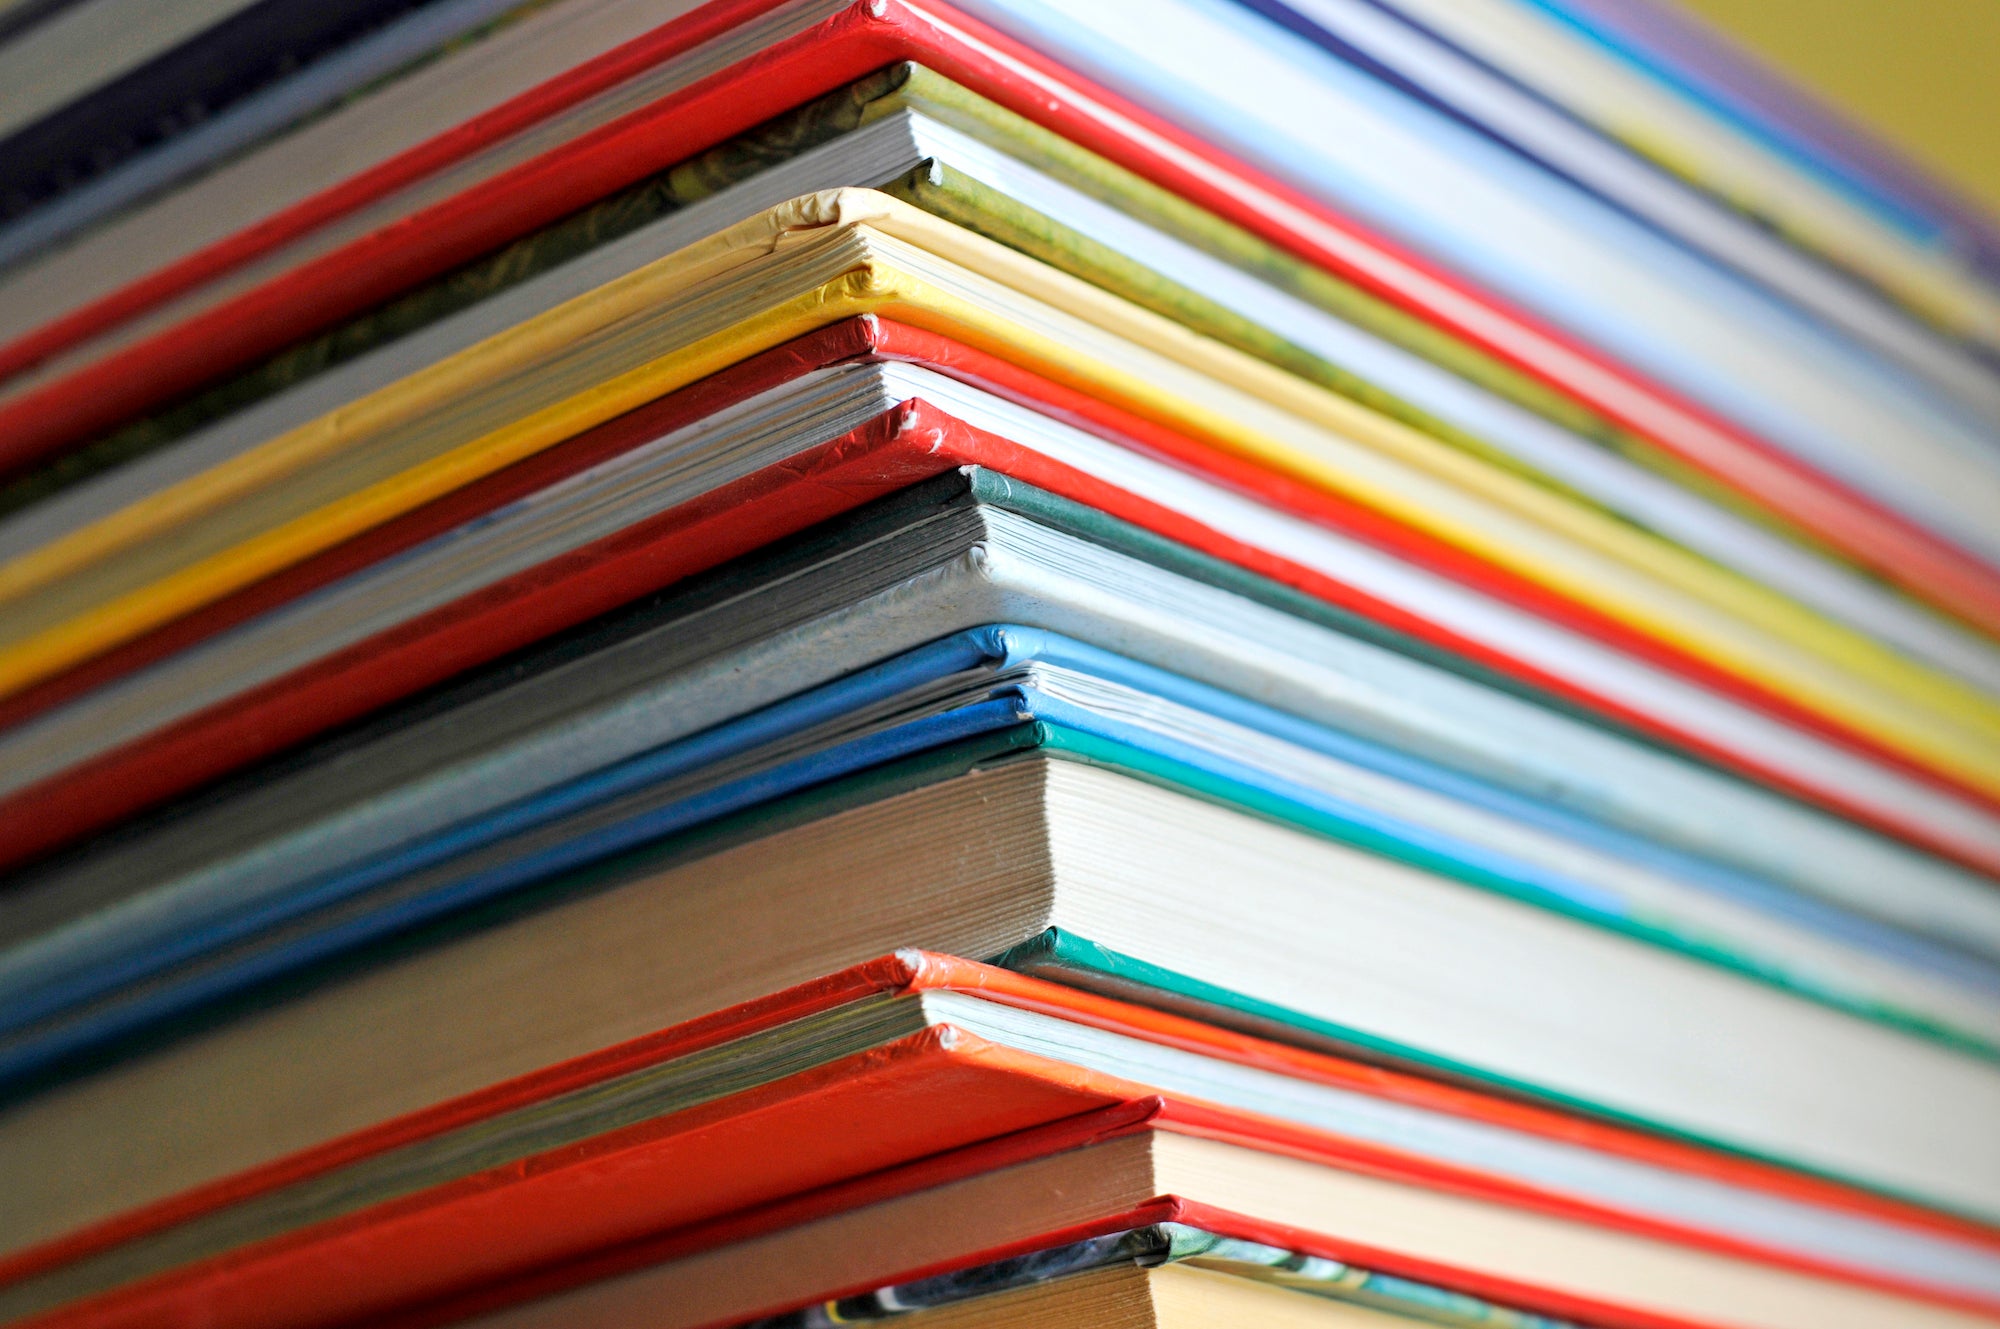 Stack of colorful books.